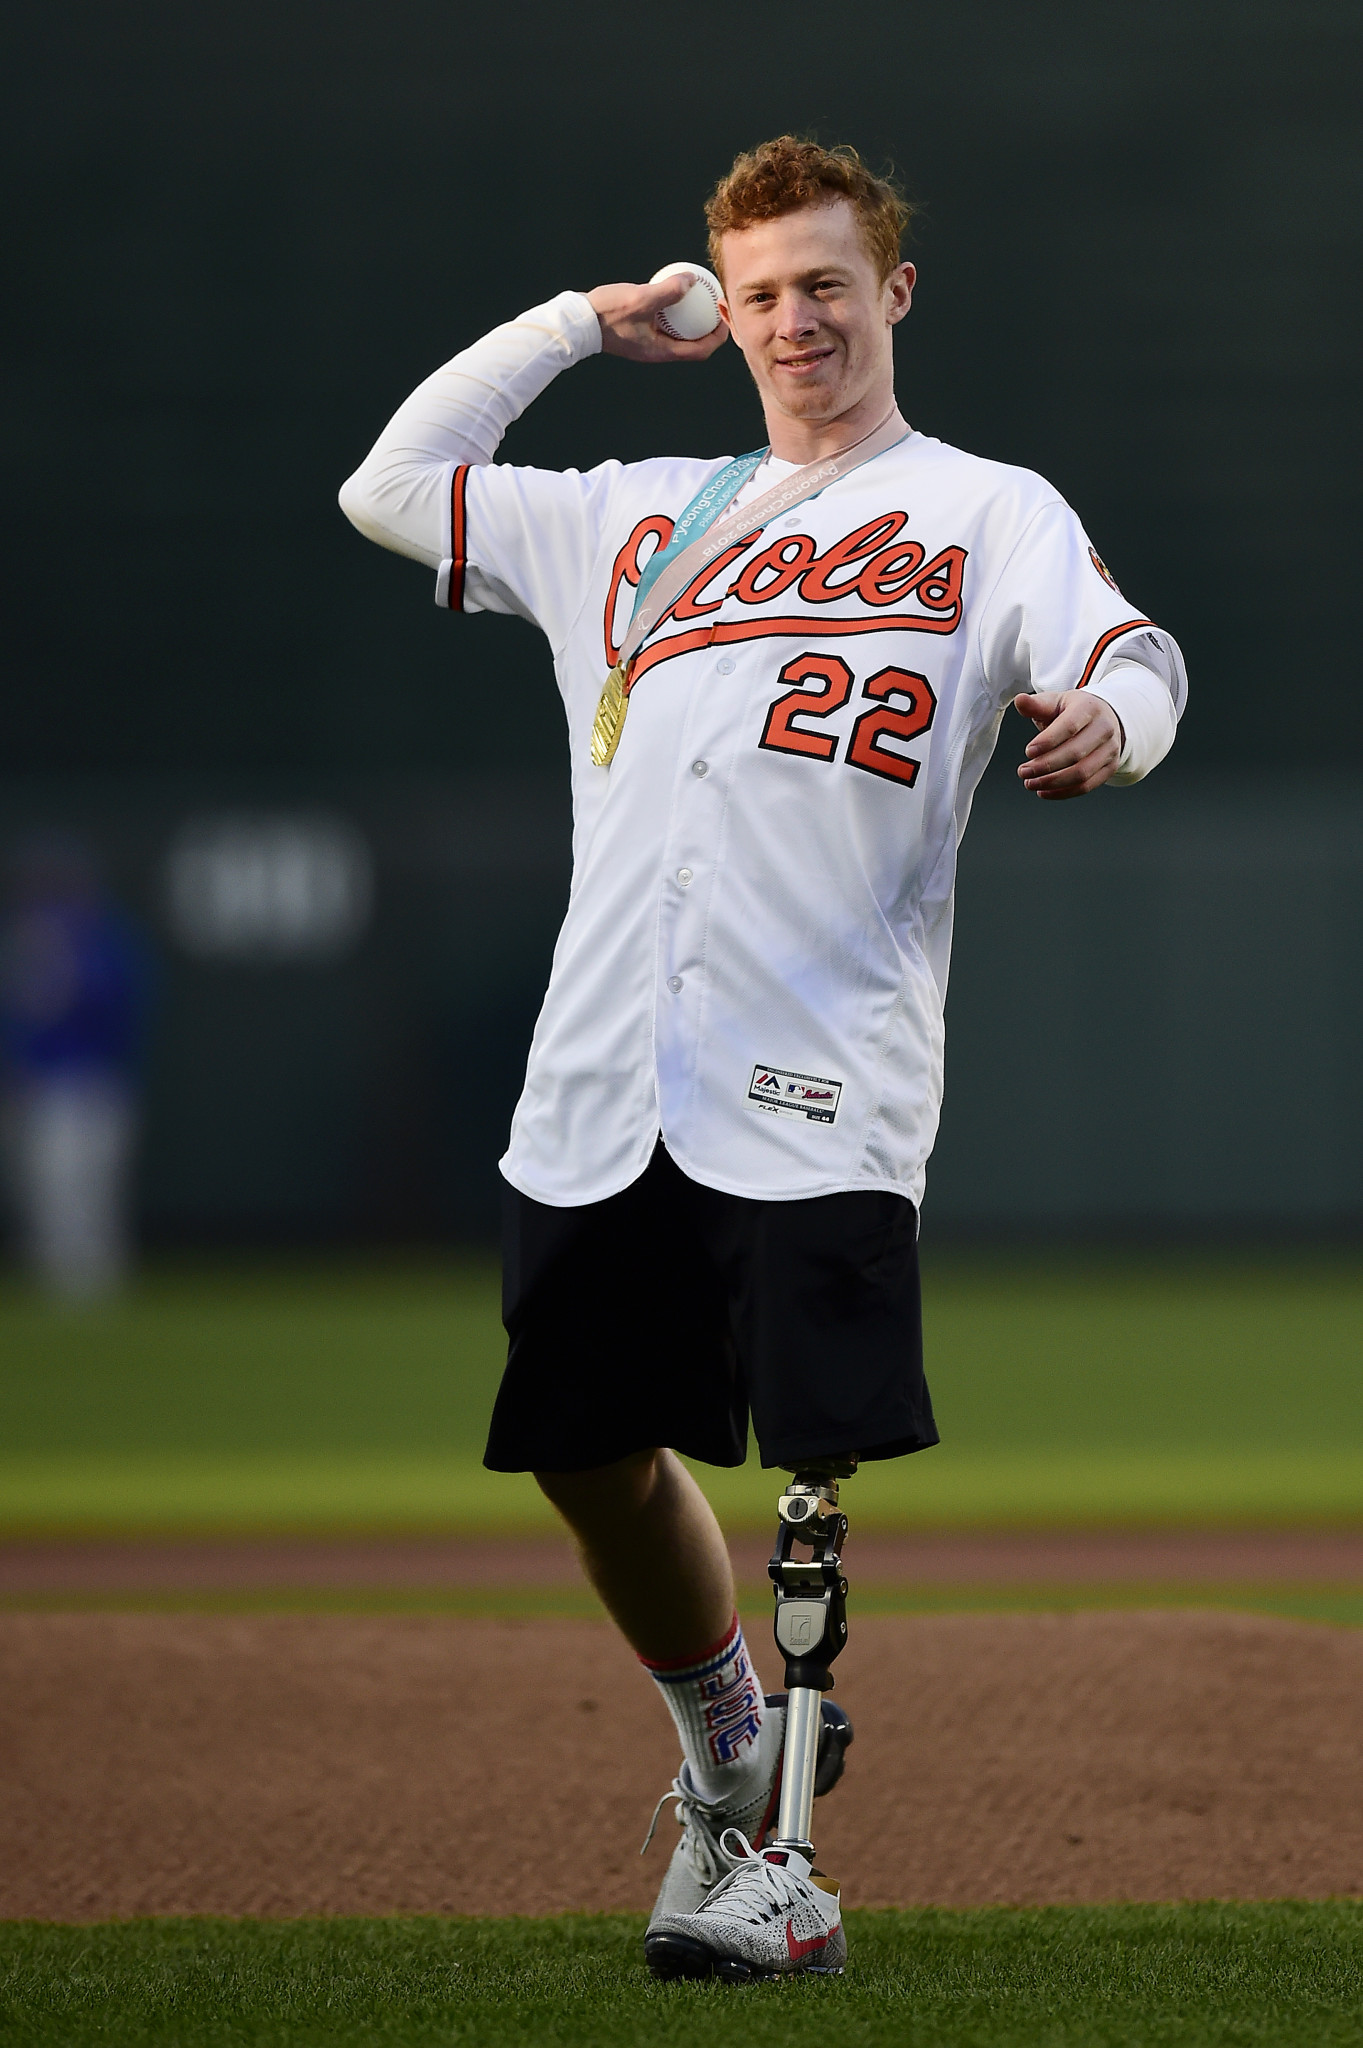 Noah Grove performed a ceremonial first pitch before a Baltimore Orioles game after winning Paralympic gold in Pyeongchang ©Getty Images